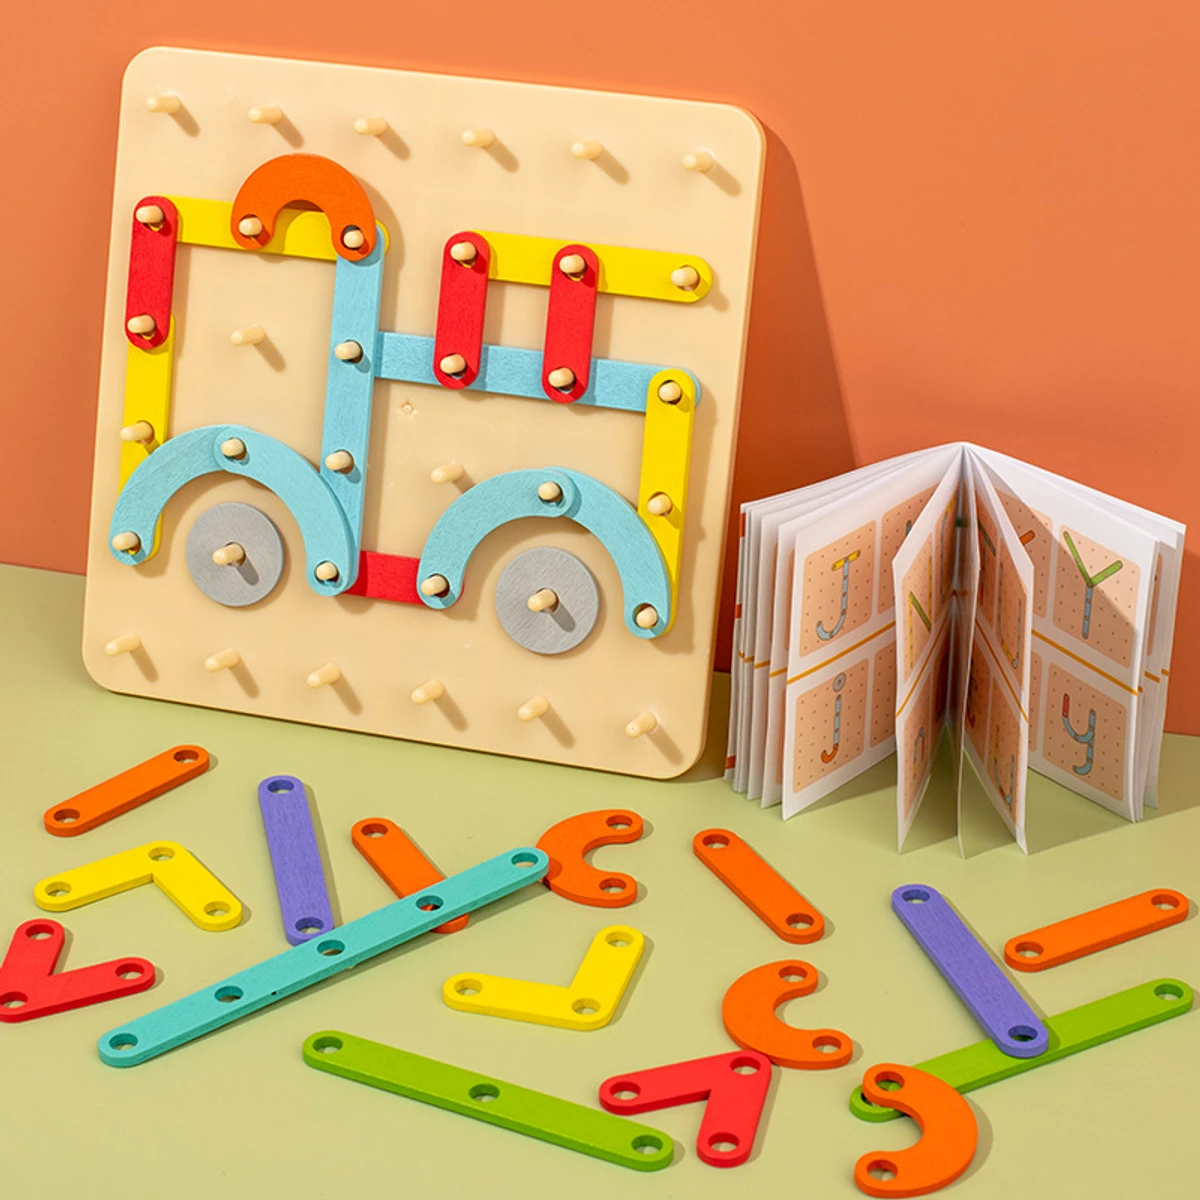 Montessori Wooden Letters Puzzles Toys for Kids- Creative Board